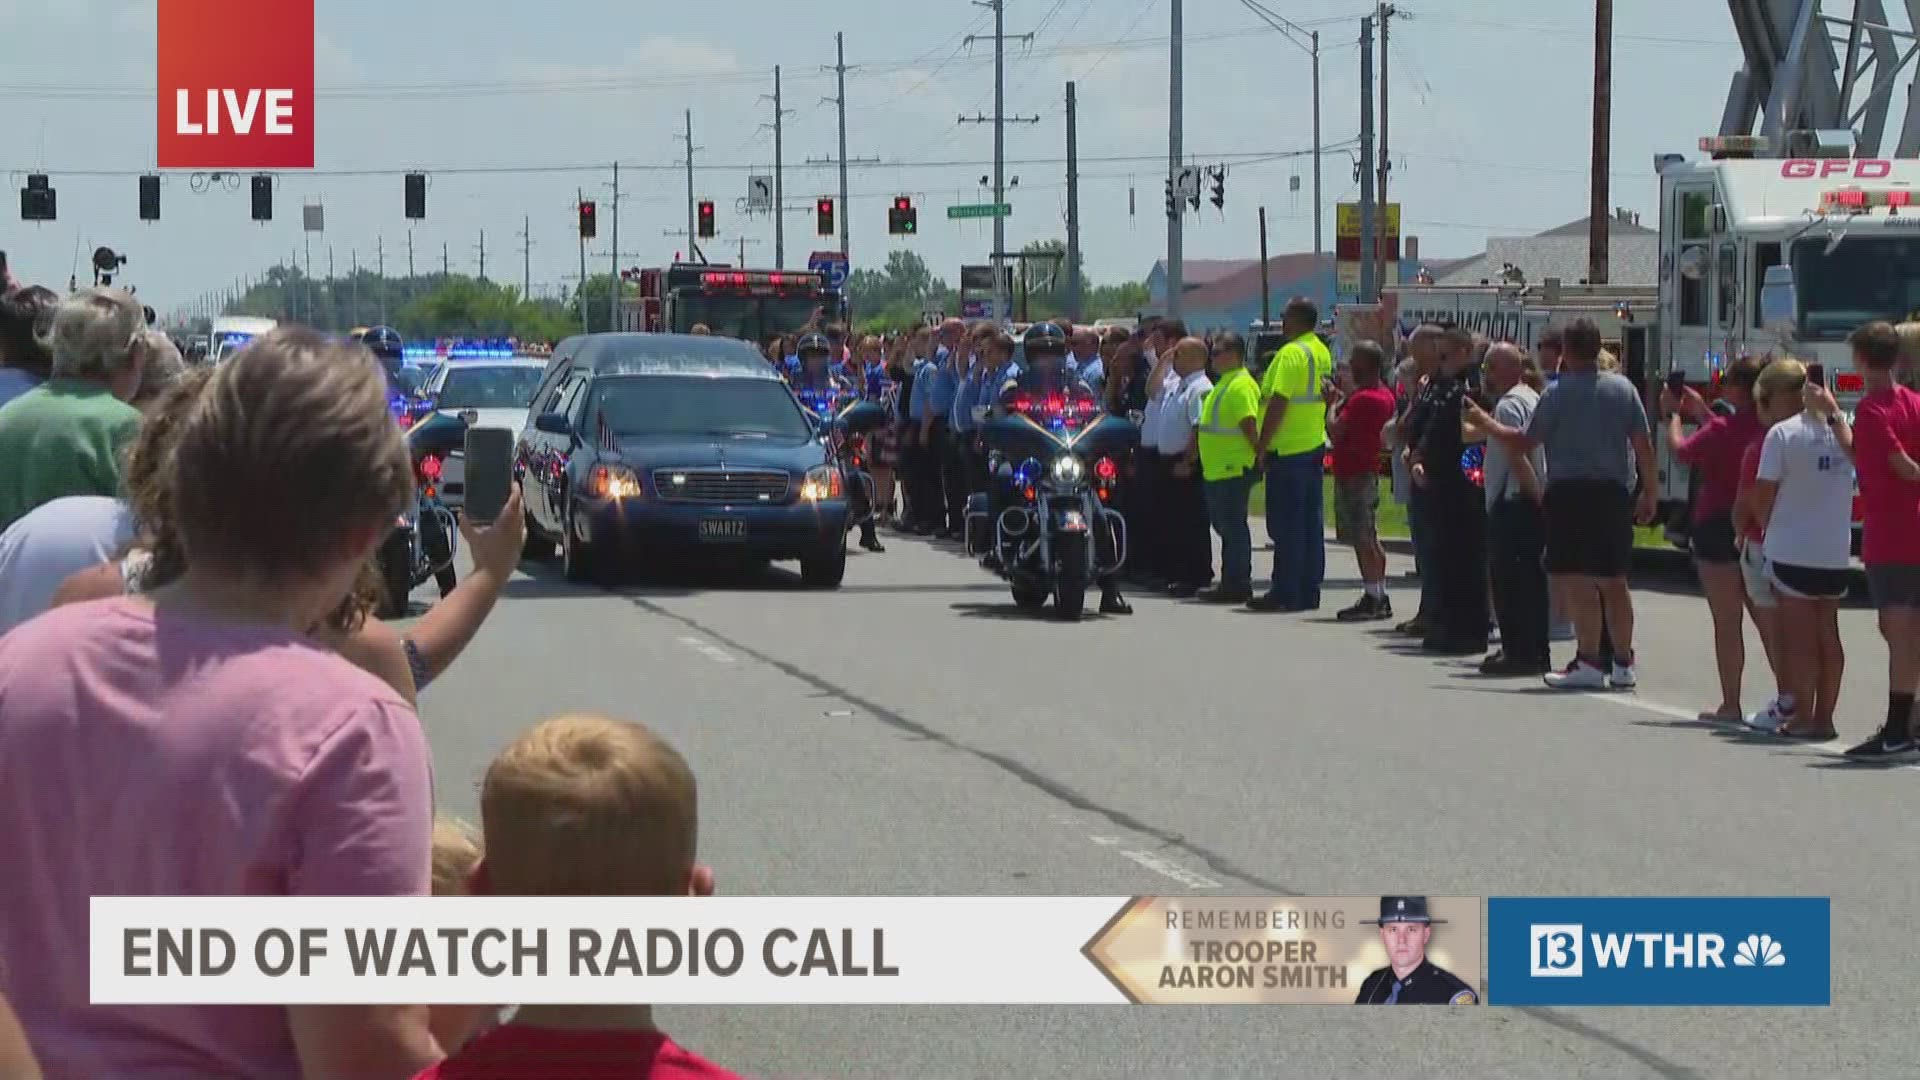 The End of Watch radio broadcast for fallen Indiana State Police Trooper Aaron Smith.